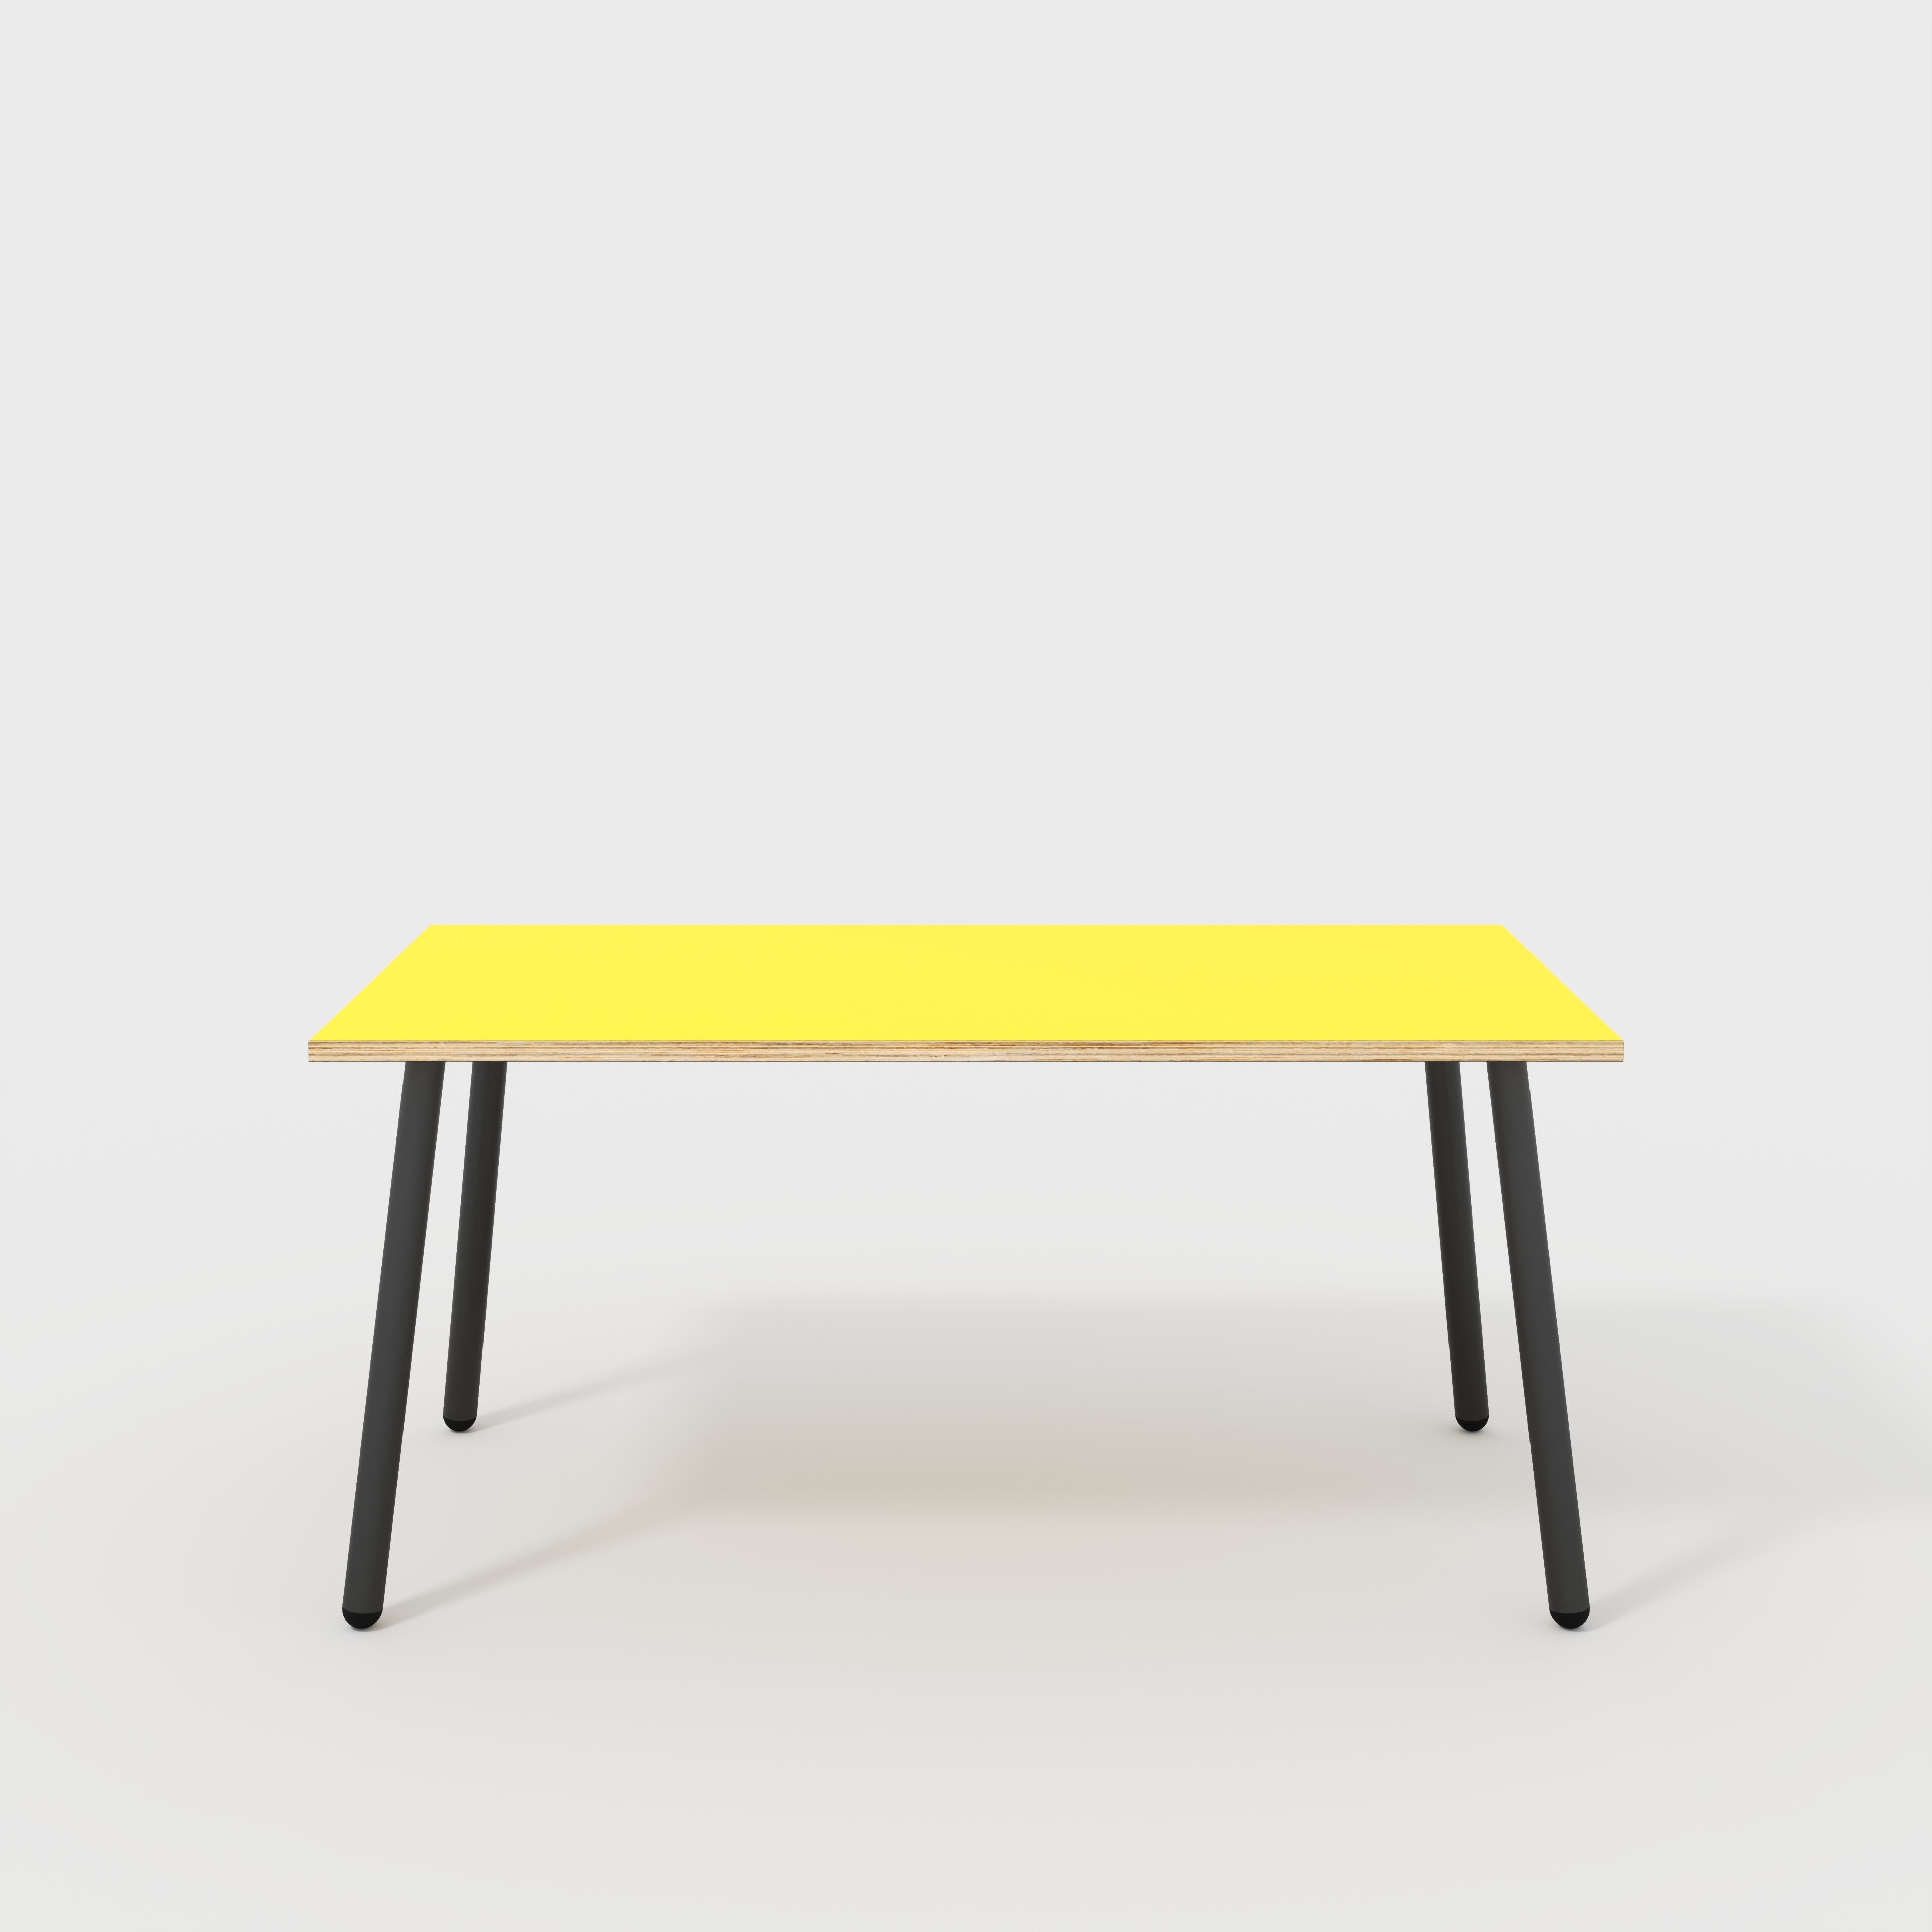 Desk with Black Round Single Pin Legs - Formica Chrome Yellow - 1600(w) x 800(d) x 735(h)